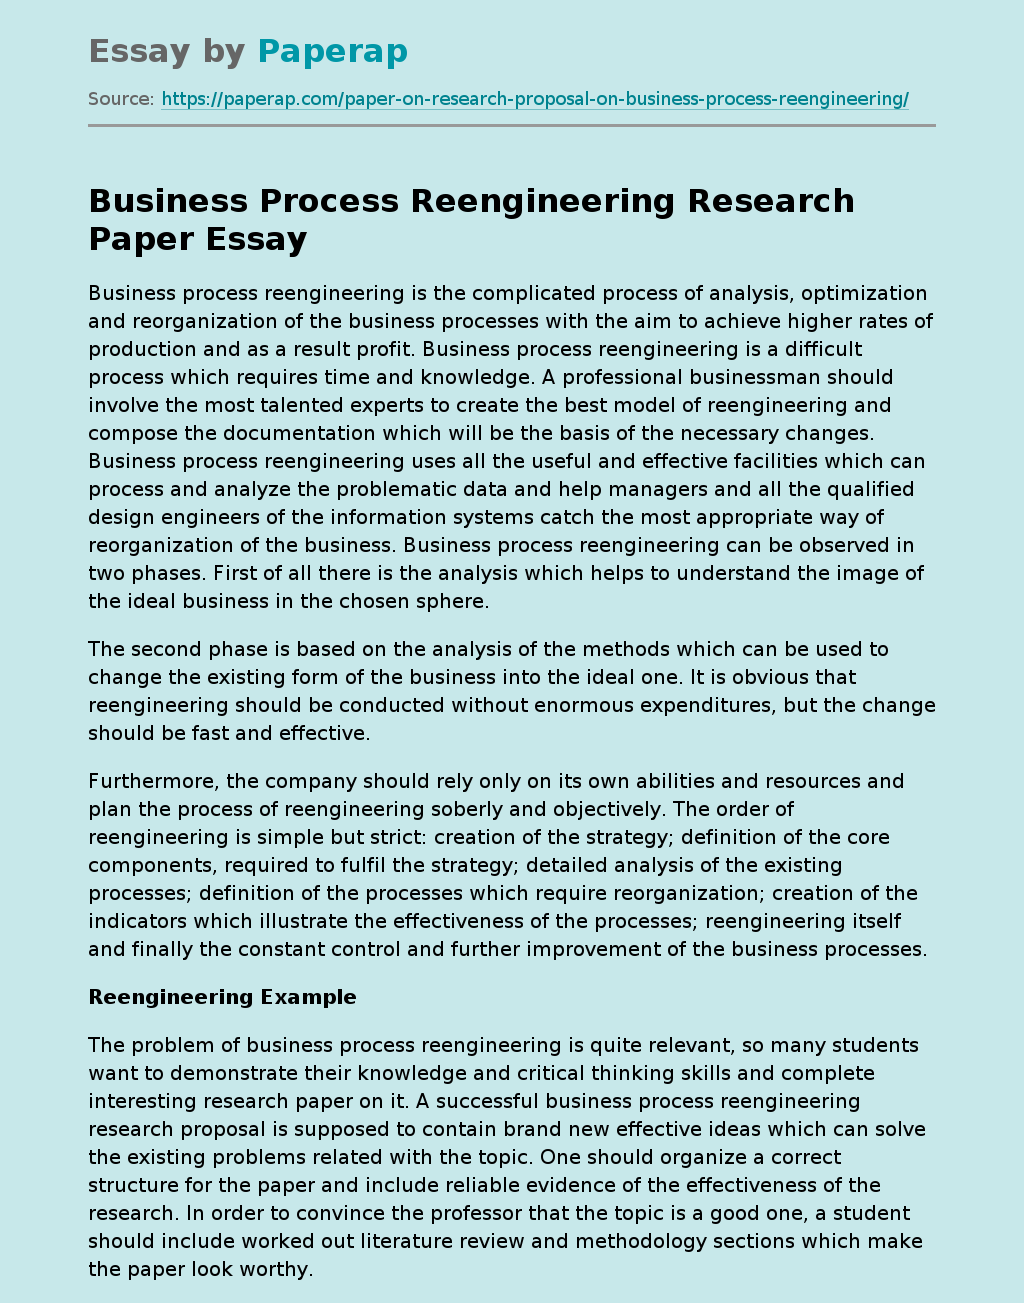 Business Process Reengineering Research Paper